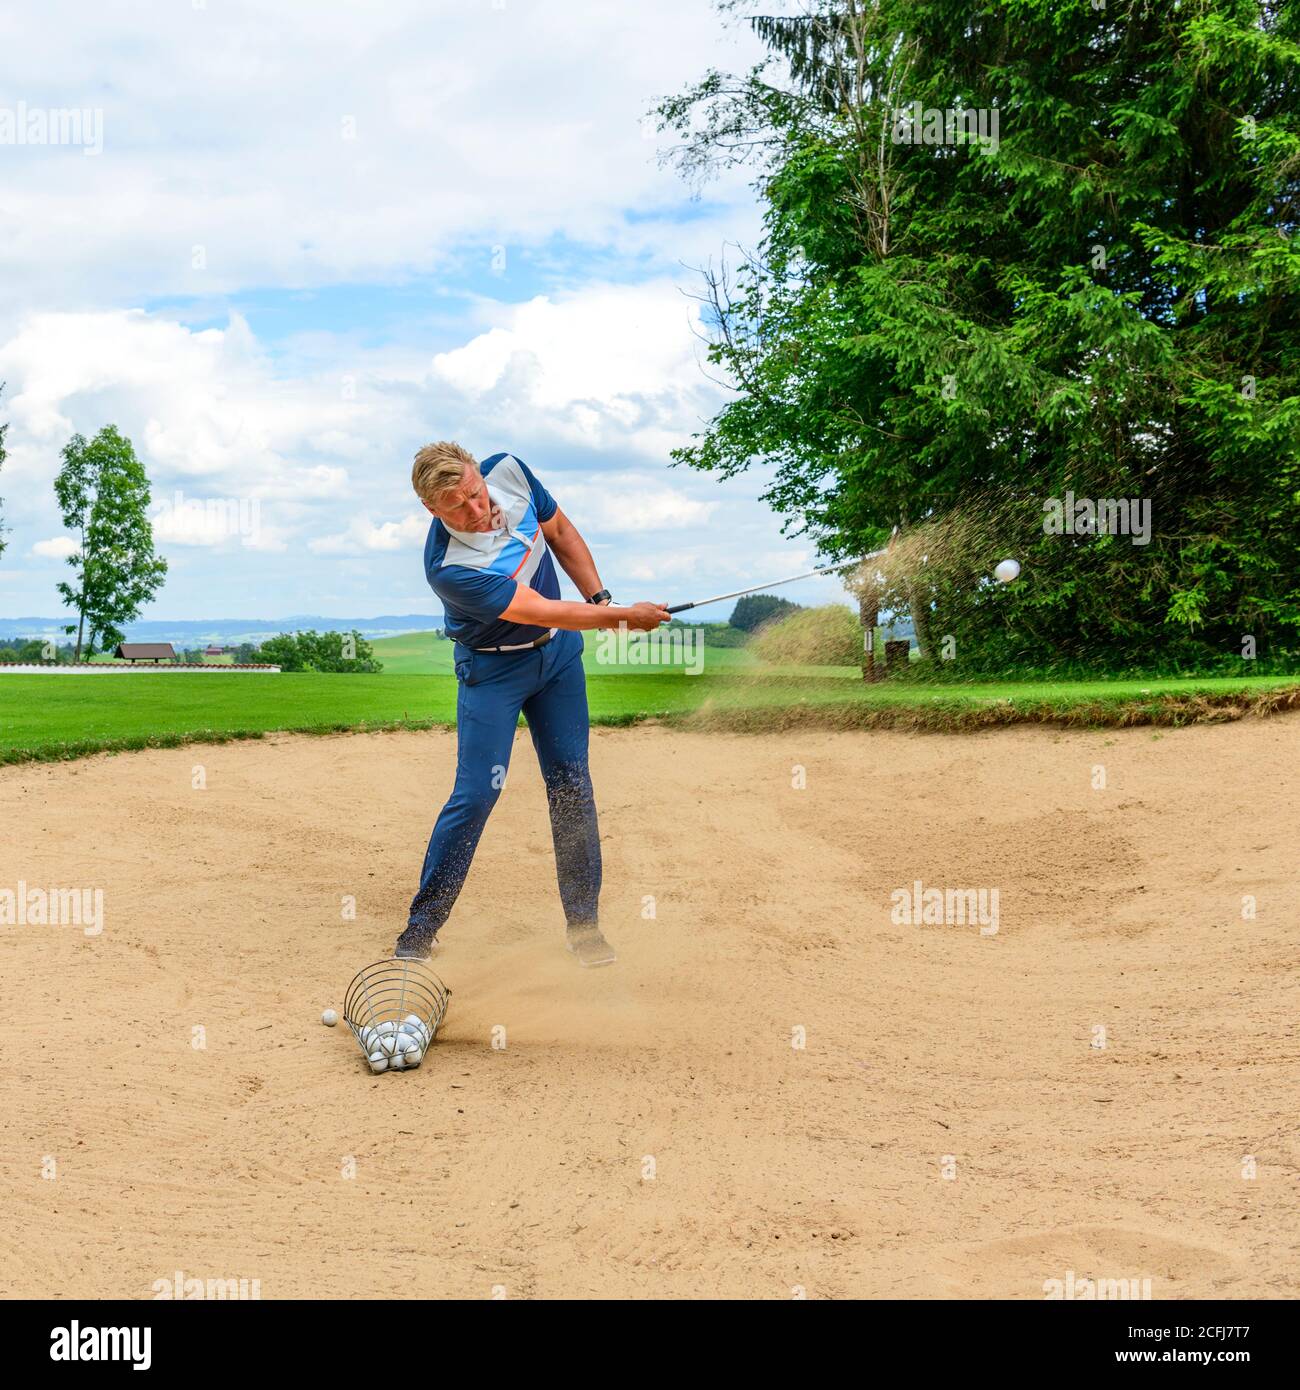 Golf lesson with pro in bunker Stock Photo